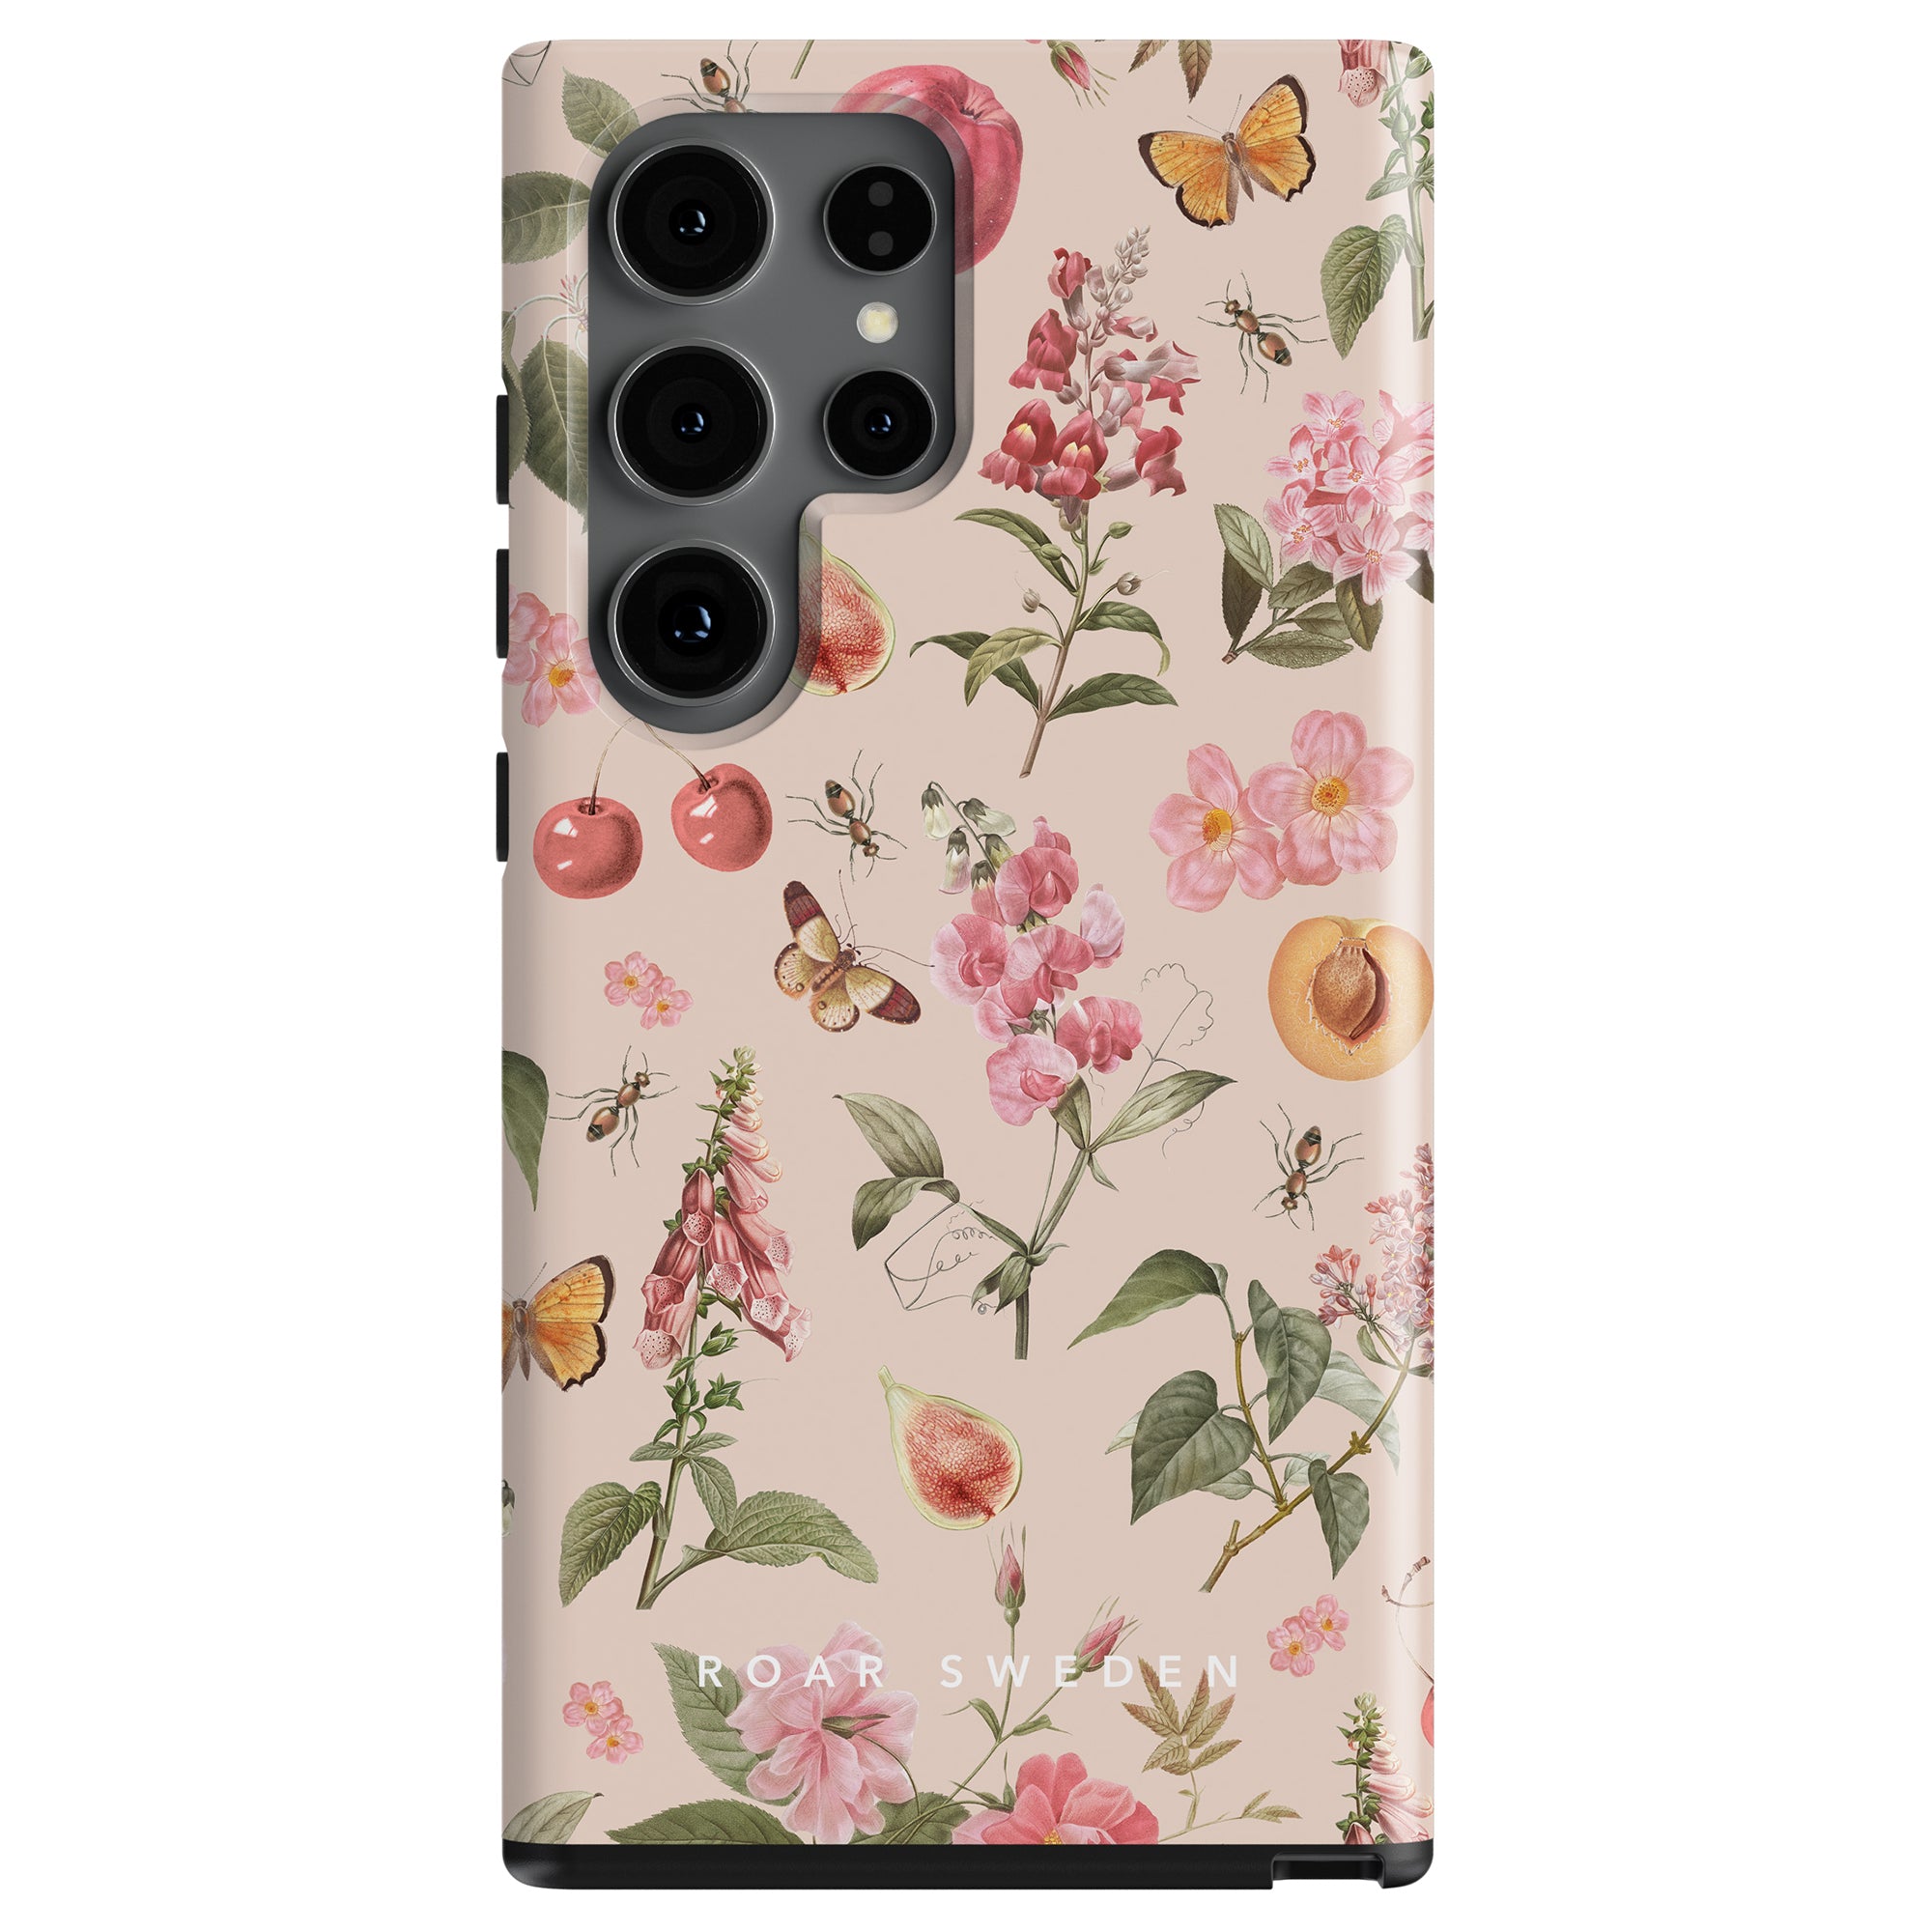 A smartphone with a Romantic Spring - Tough Case design featuring butterflies and fruits, equipped with a triple-lens camera.